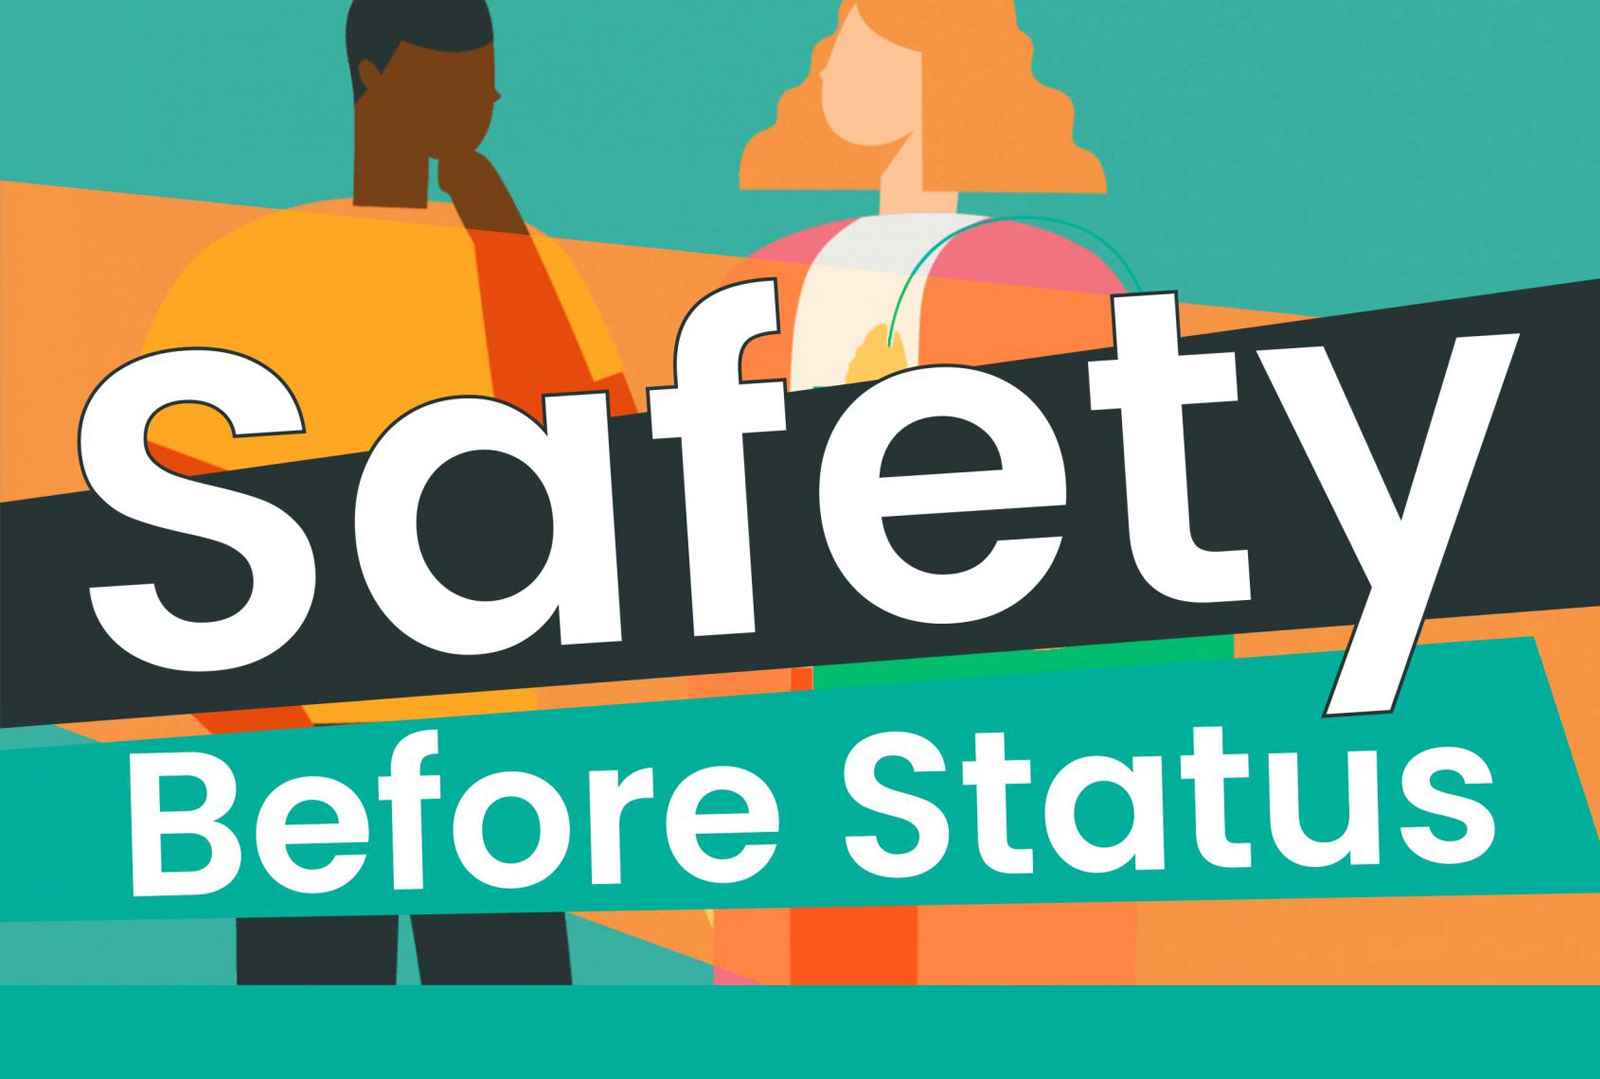 Home Office accepts several ‘Safety before Status’ recommendations